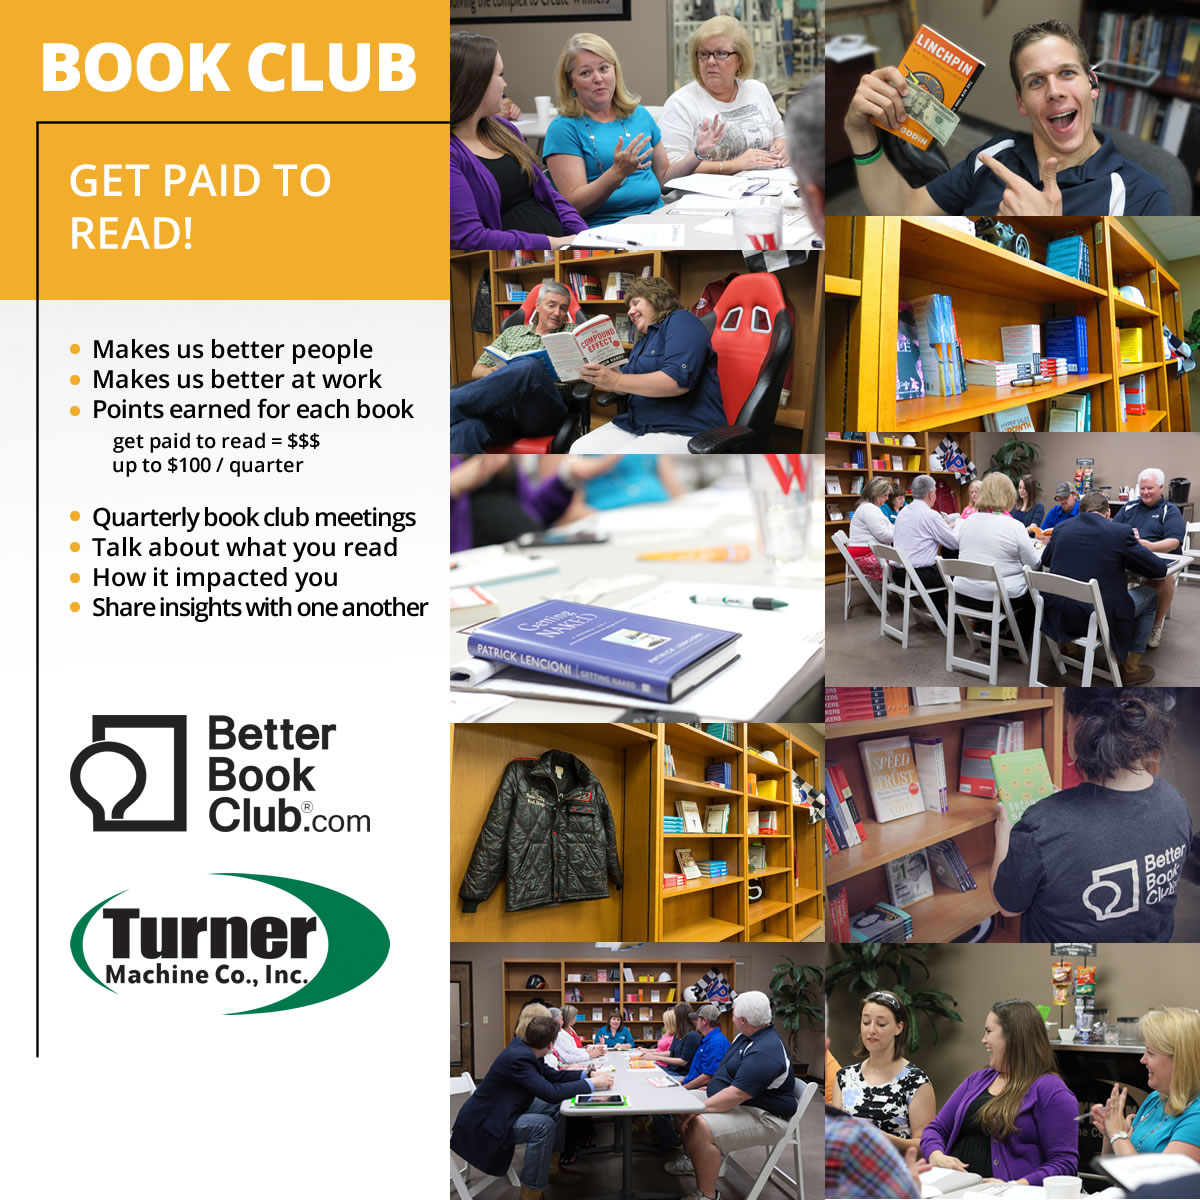 Better Book Club, What Makes Turner Machine Better